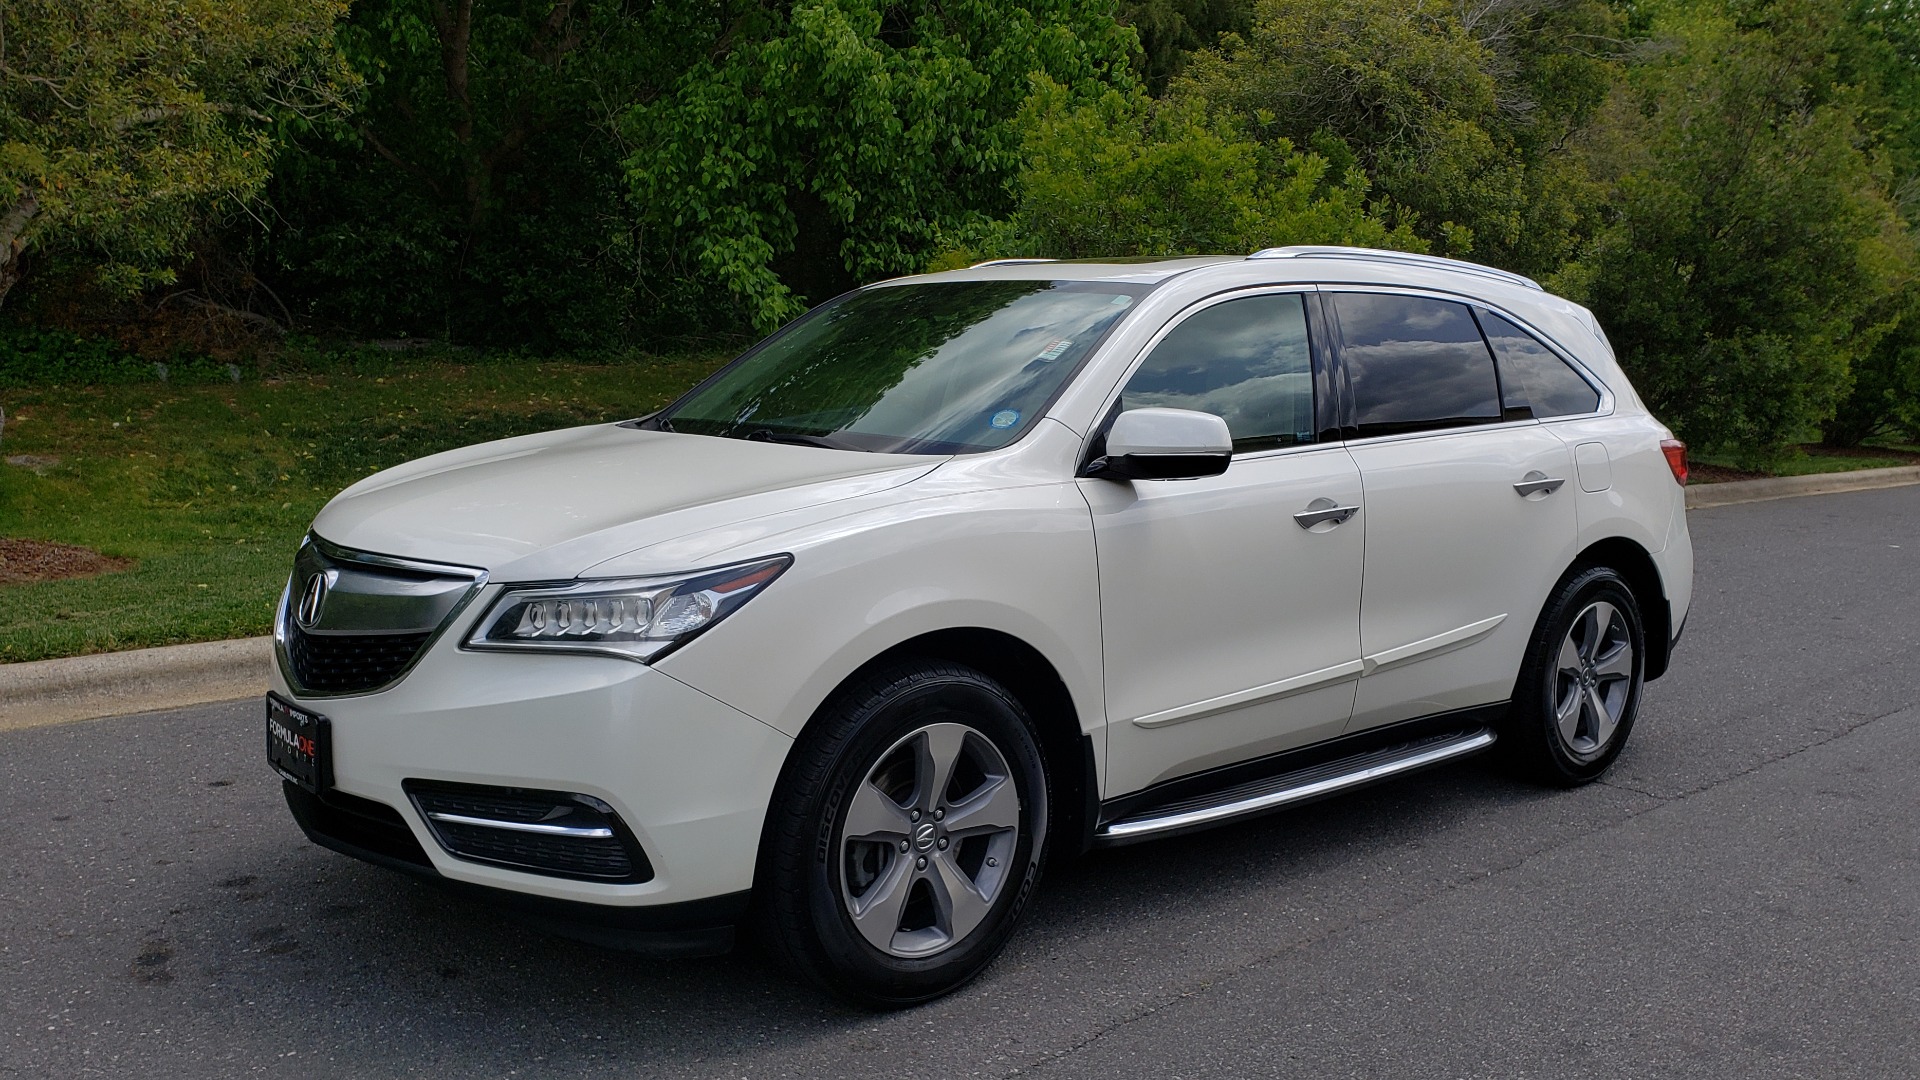 Used 2014 Acura MDX AWD / NAV / SUNROOF / 3-ROW / REARVIEW / PREMIUM SND for sale Sold at Formula Imports in Charlotte NC 28227 1